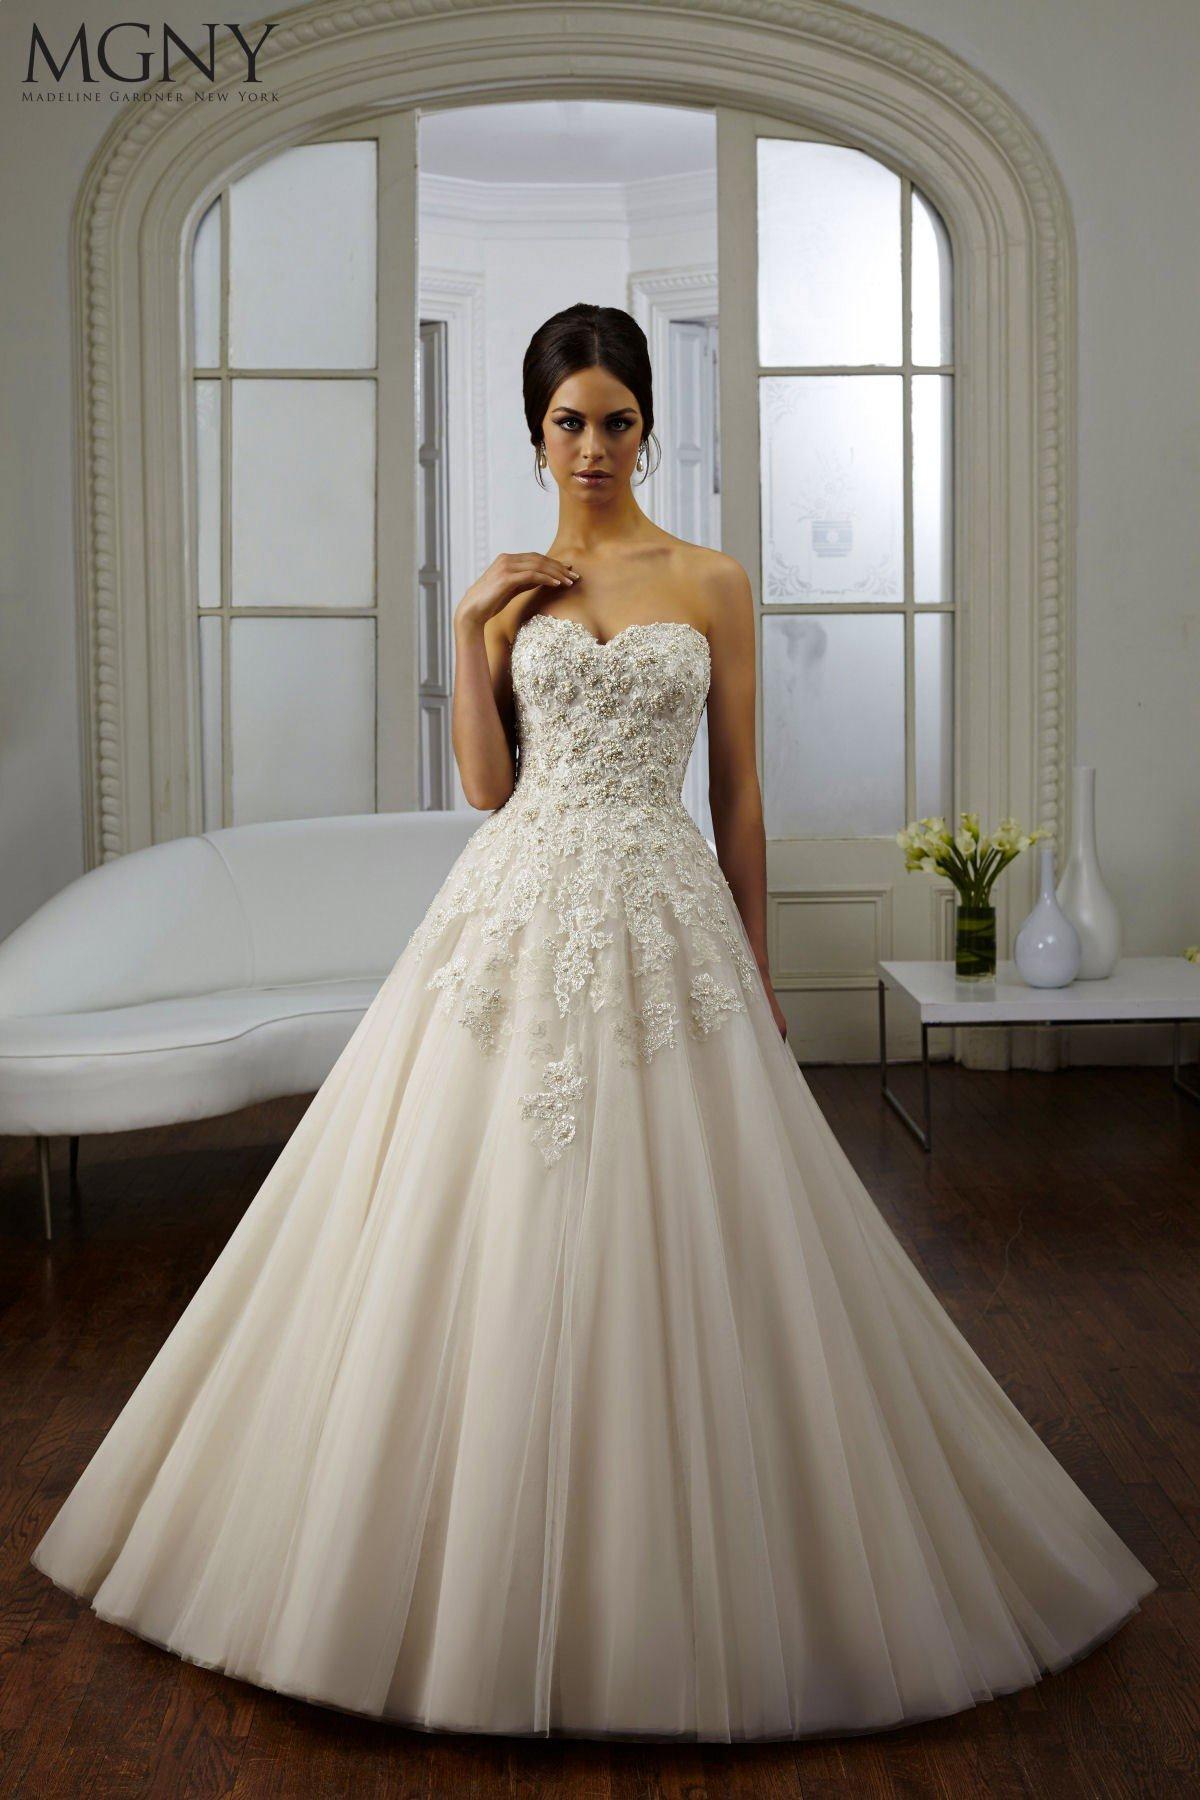 Gowns for Small-Chested Brides